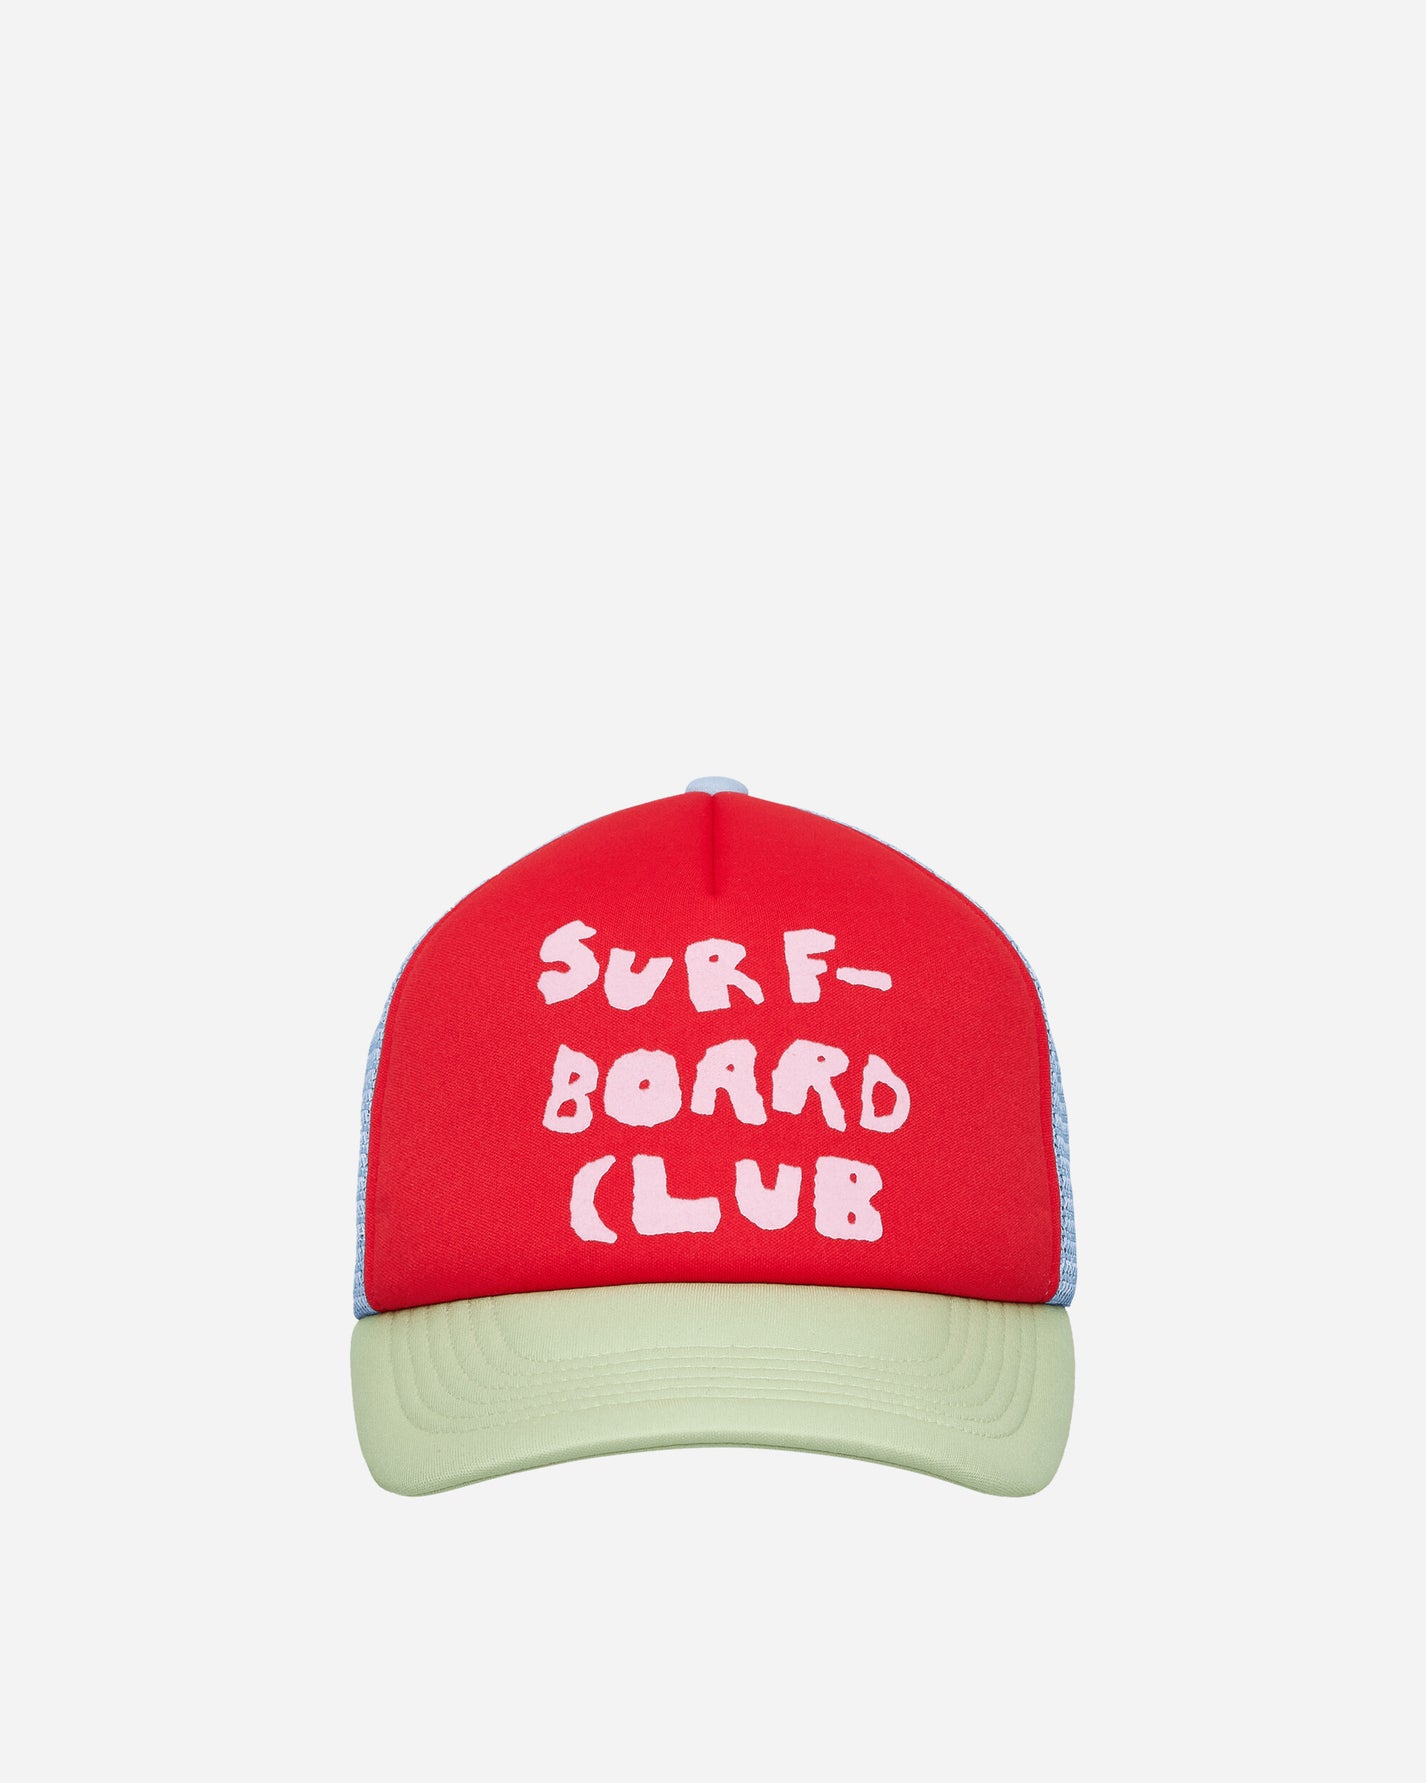 Stockholm (Surfboard) Club Pete Logo Red and Green Hats Caps U7000056 2